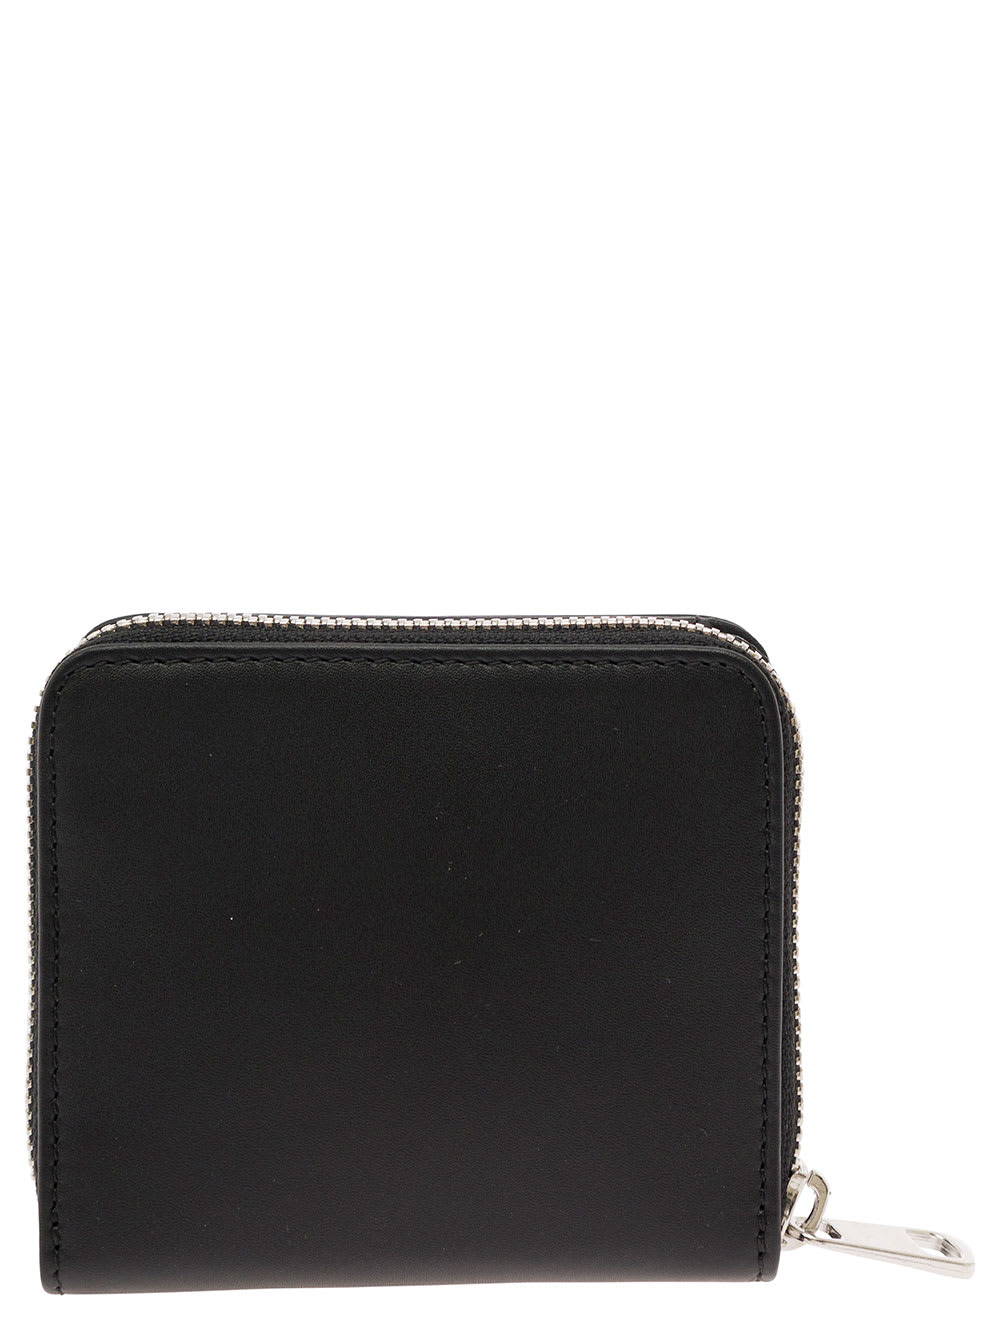 Shop Apc Emmanuel Black Wallet With Embossed Logo In Smooth Leather Man